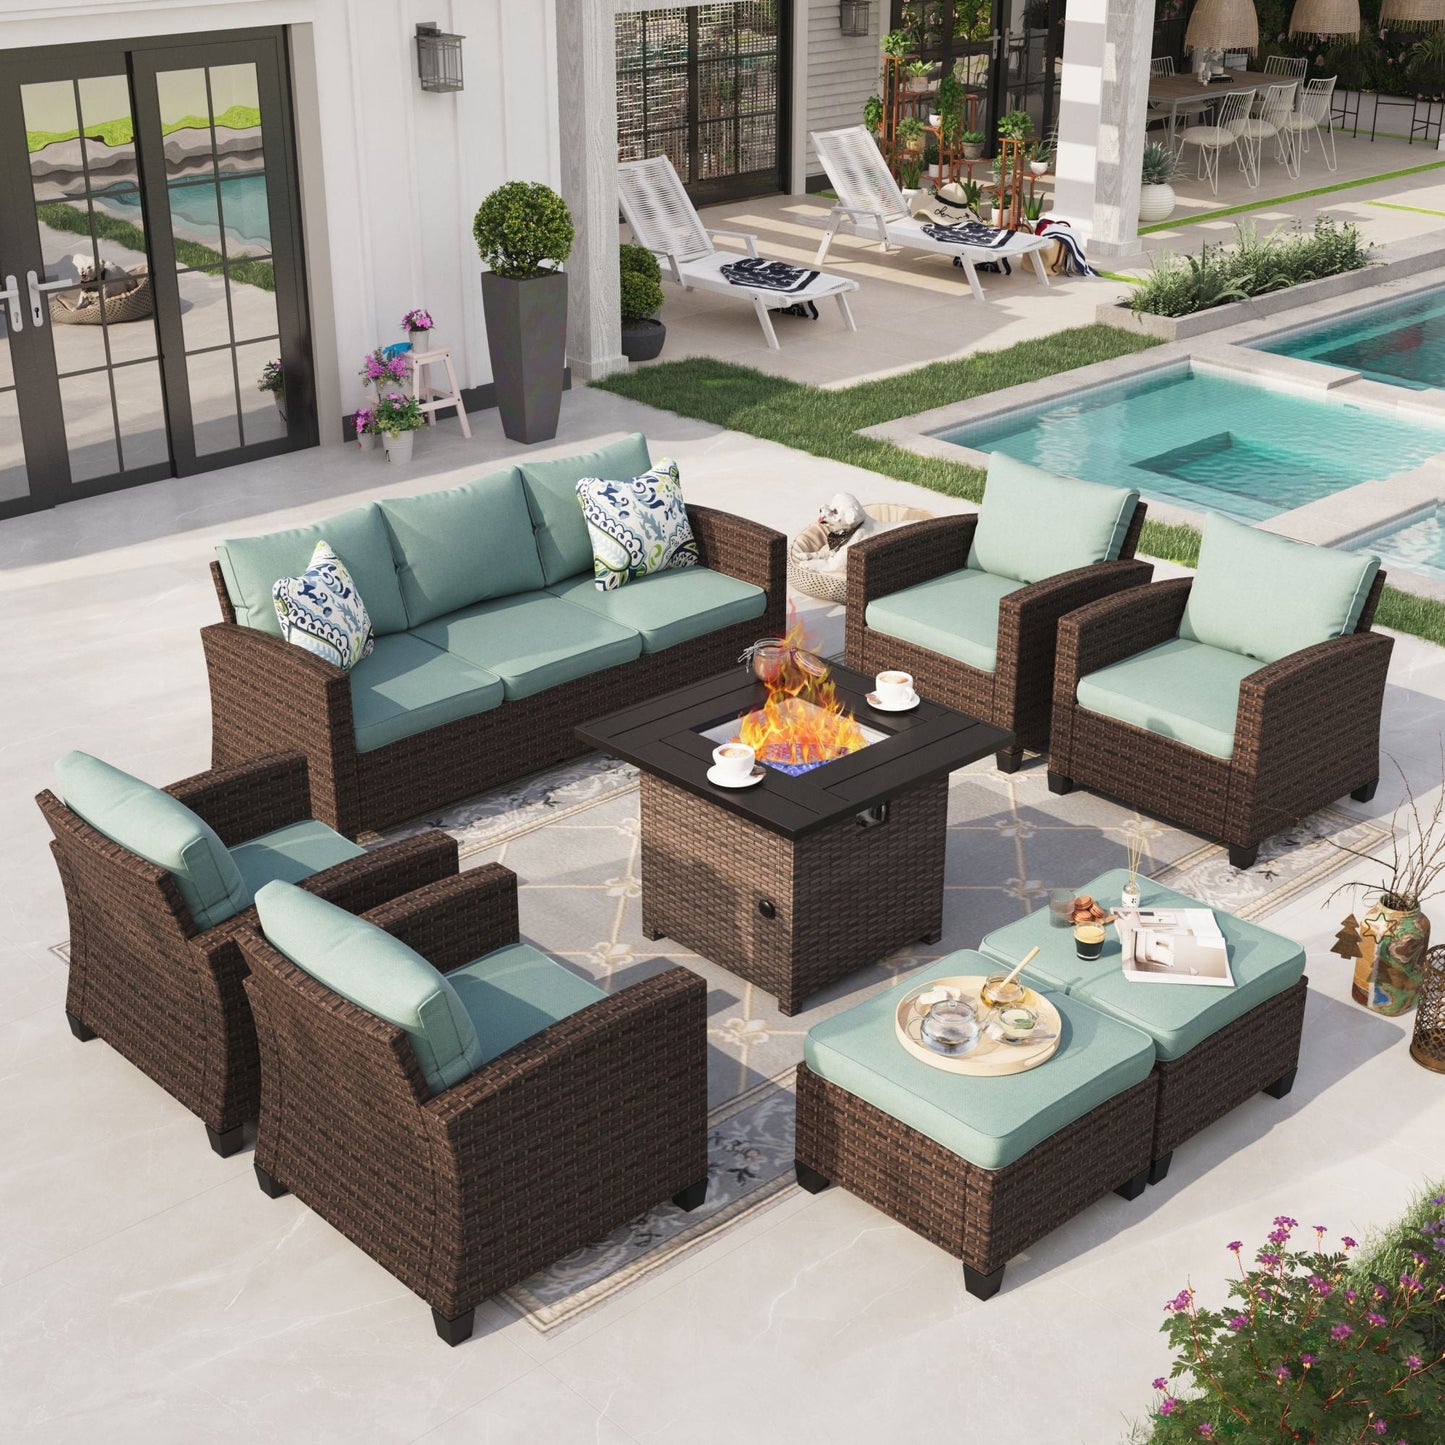 Sophia & William 9-seat Wicker Patio Converation Set with Fire Pit Table, Blue